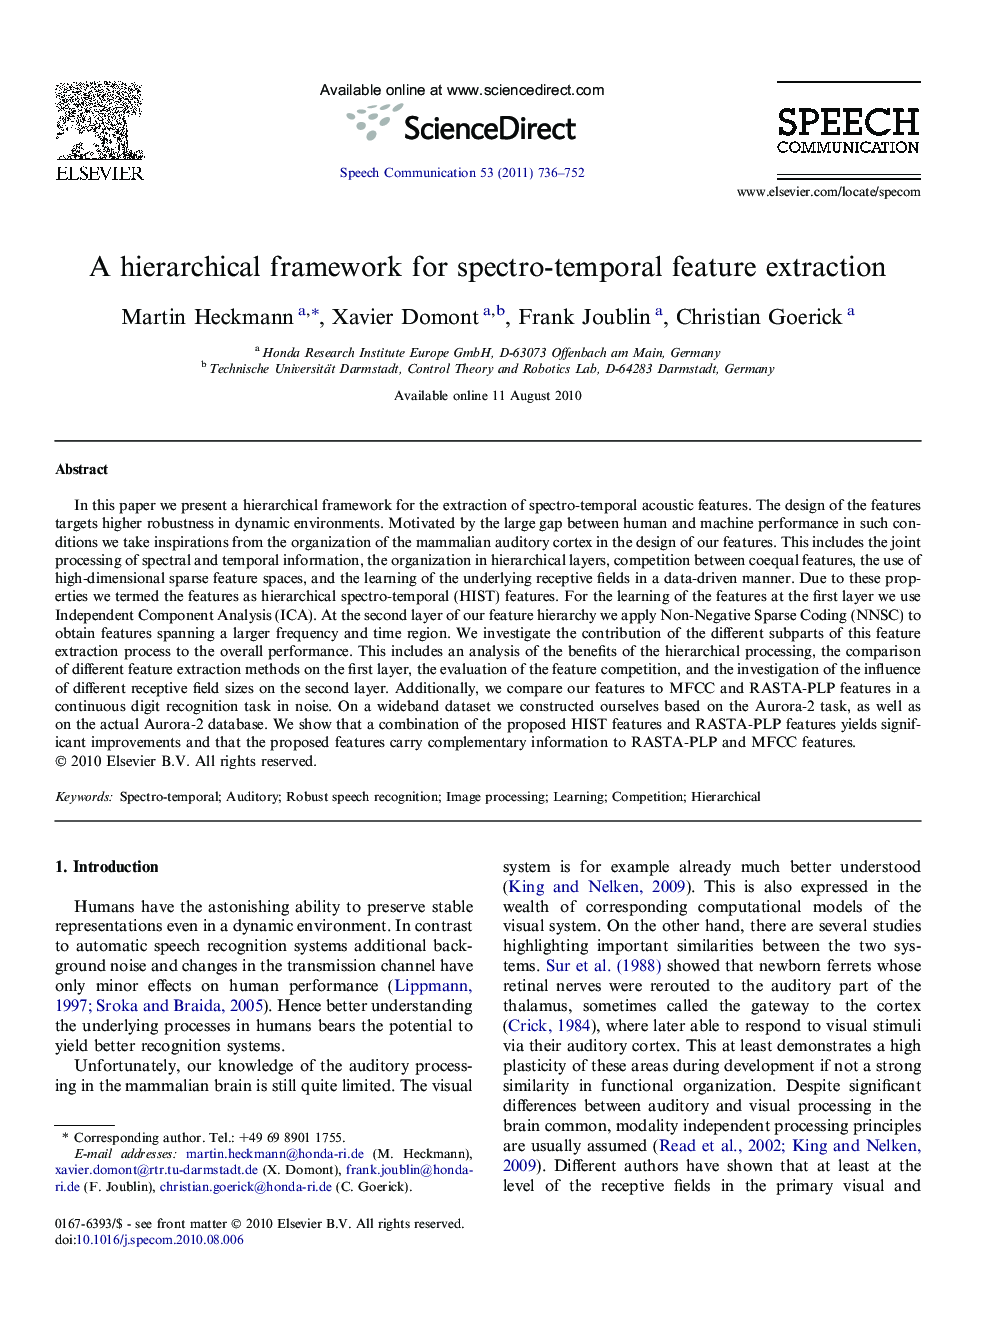 A hierarchical framework for spectro-temporal feature extraction